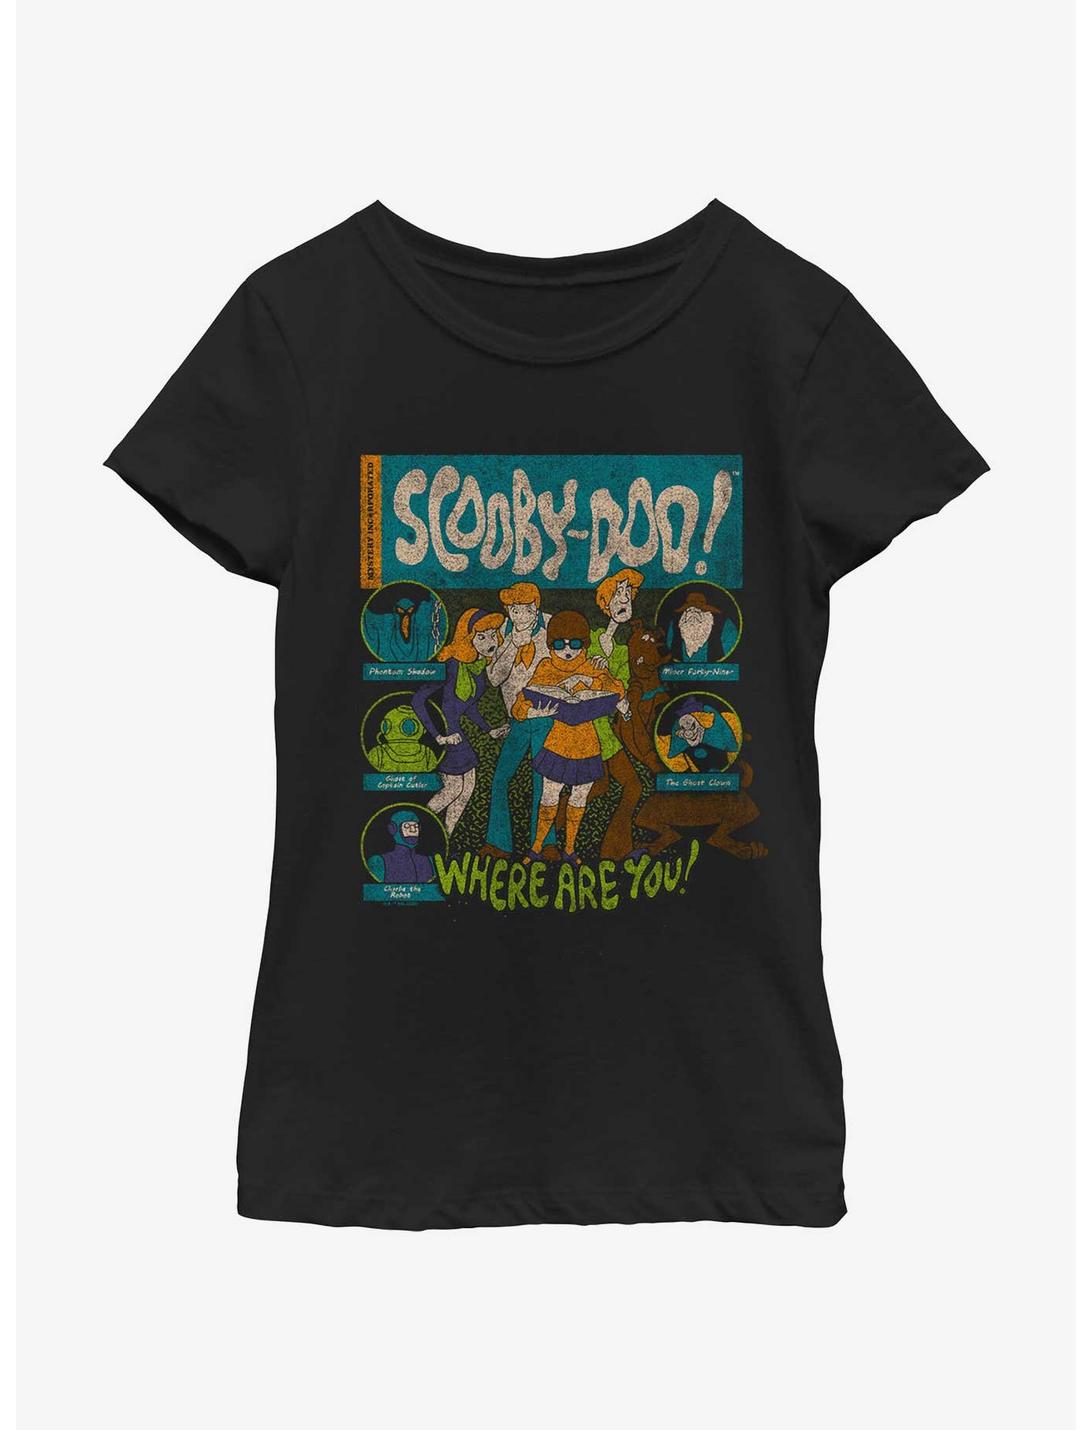 Scooby Doo Mystery Poster Youth Girls T-Shirt, BLACK, hi-res